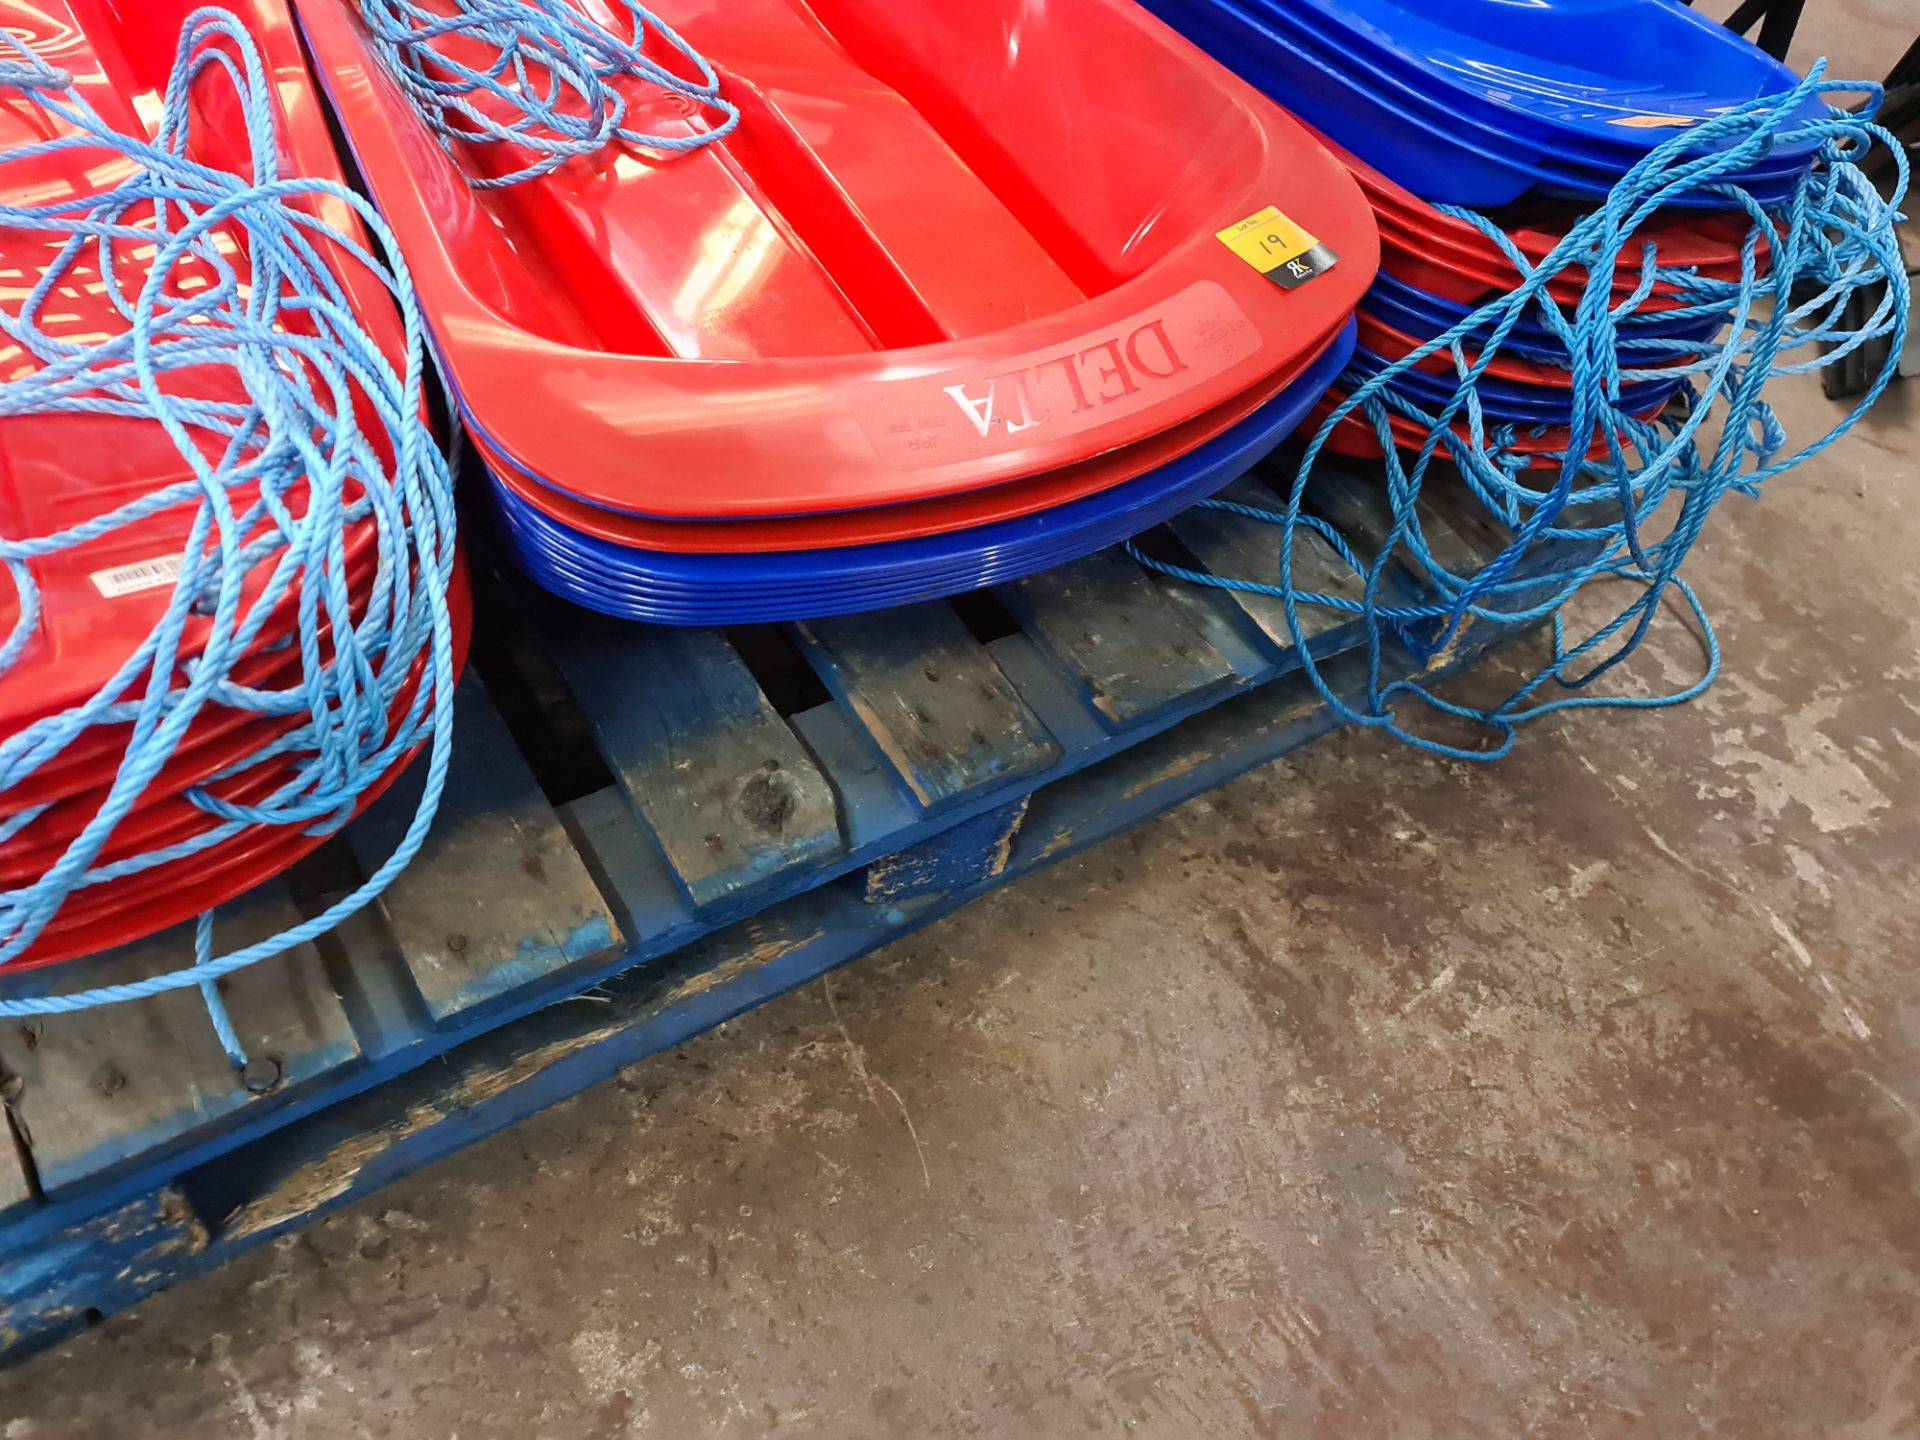 10 off Delta sledges - mixed lot of blue and red - Image 2 of 5